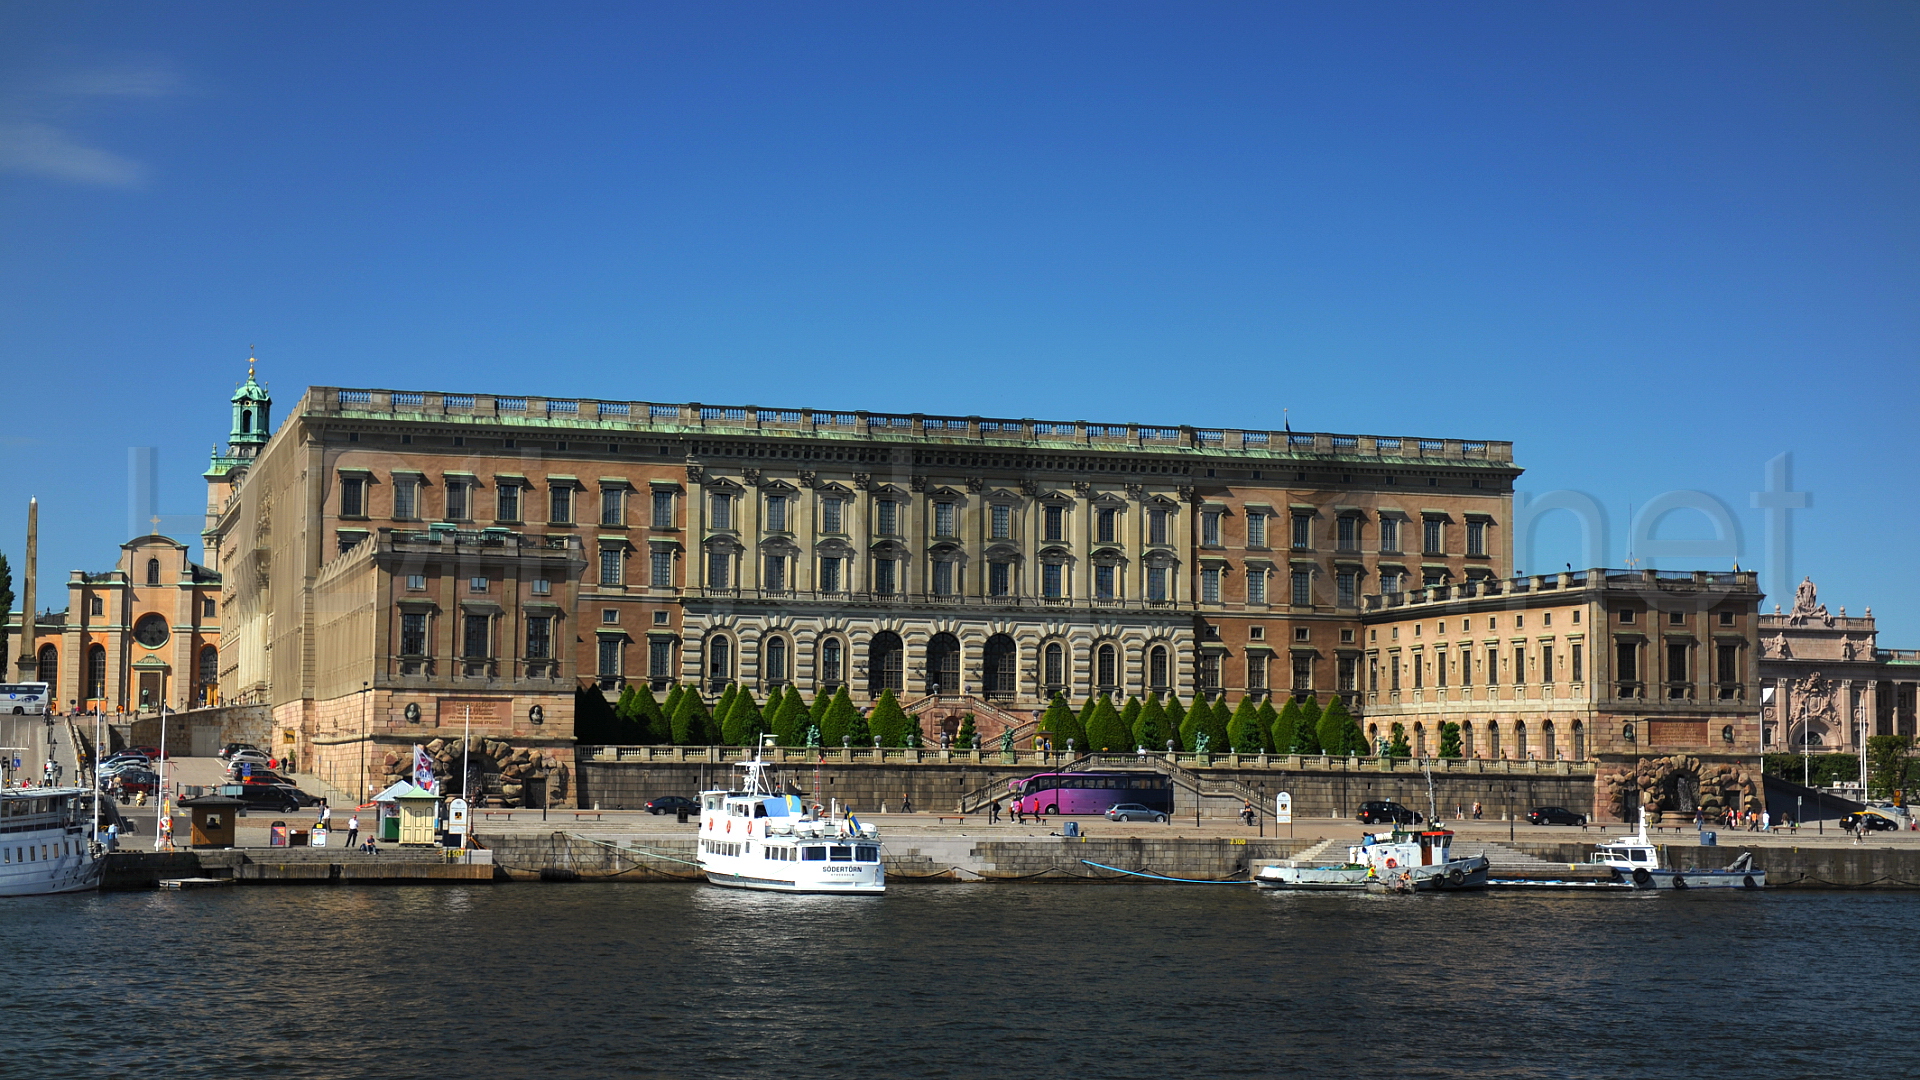 Images of Stockholm Palace | 1920x1080